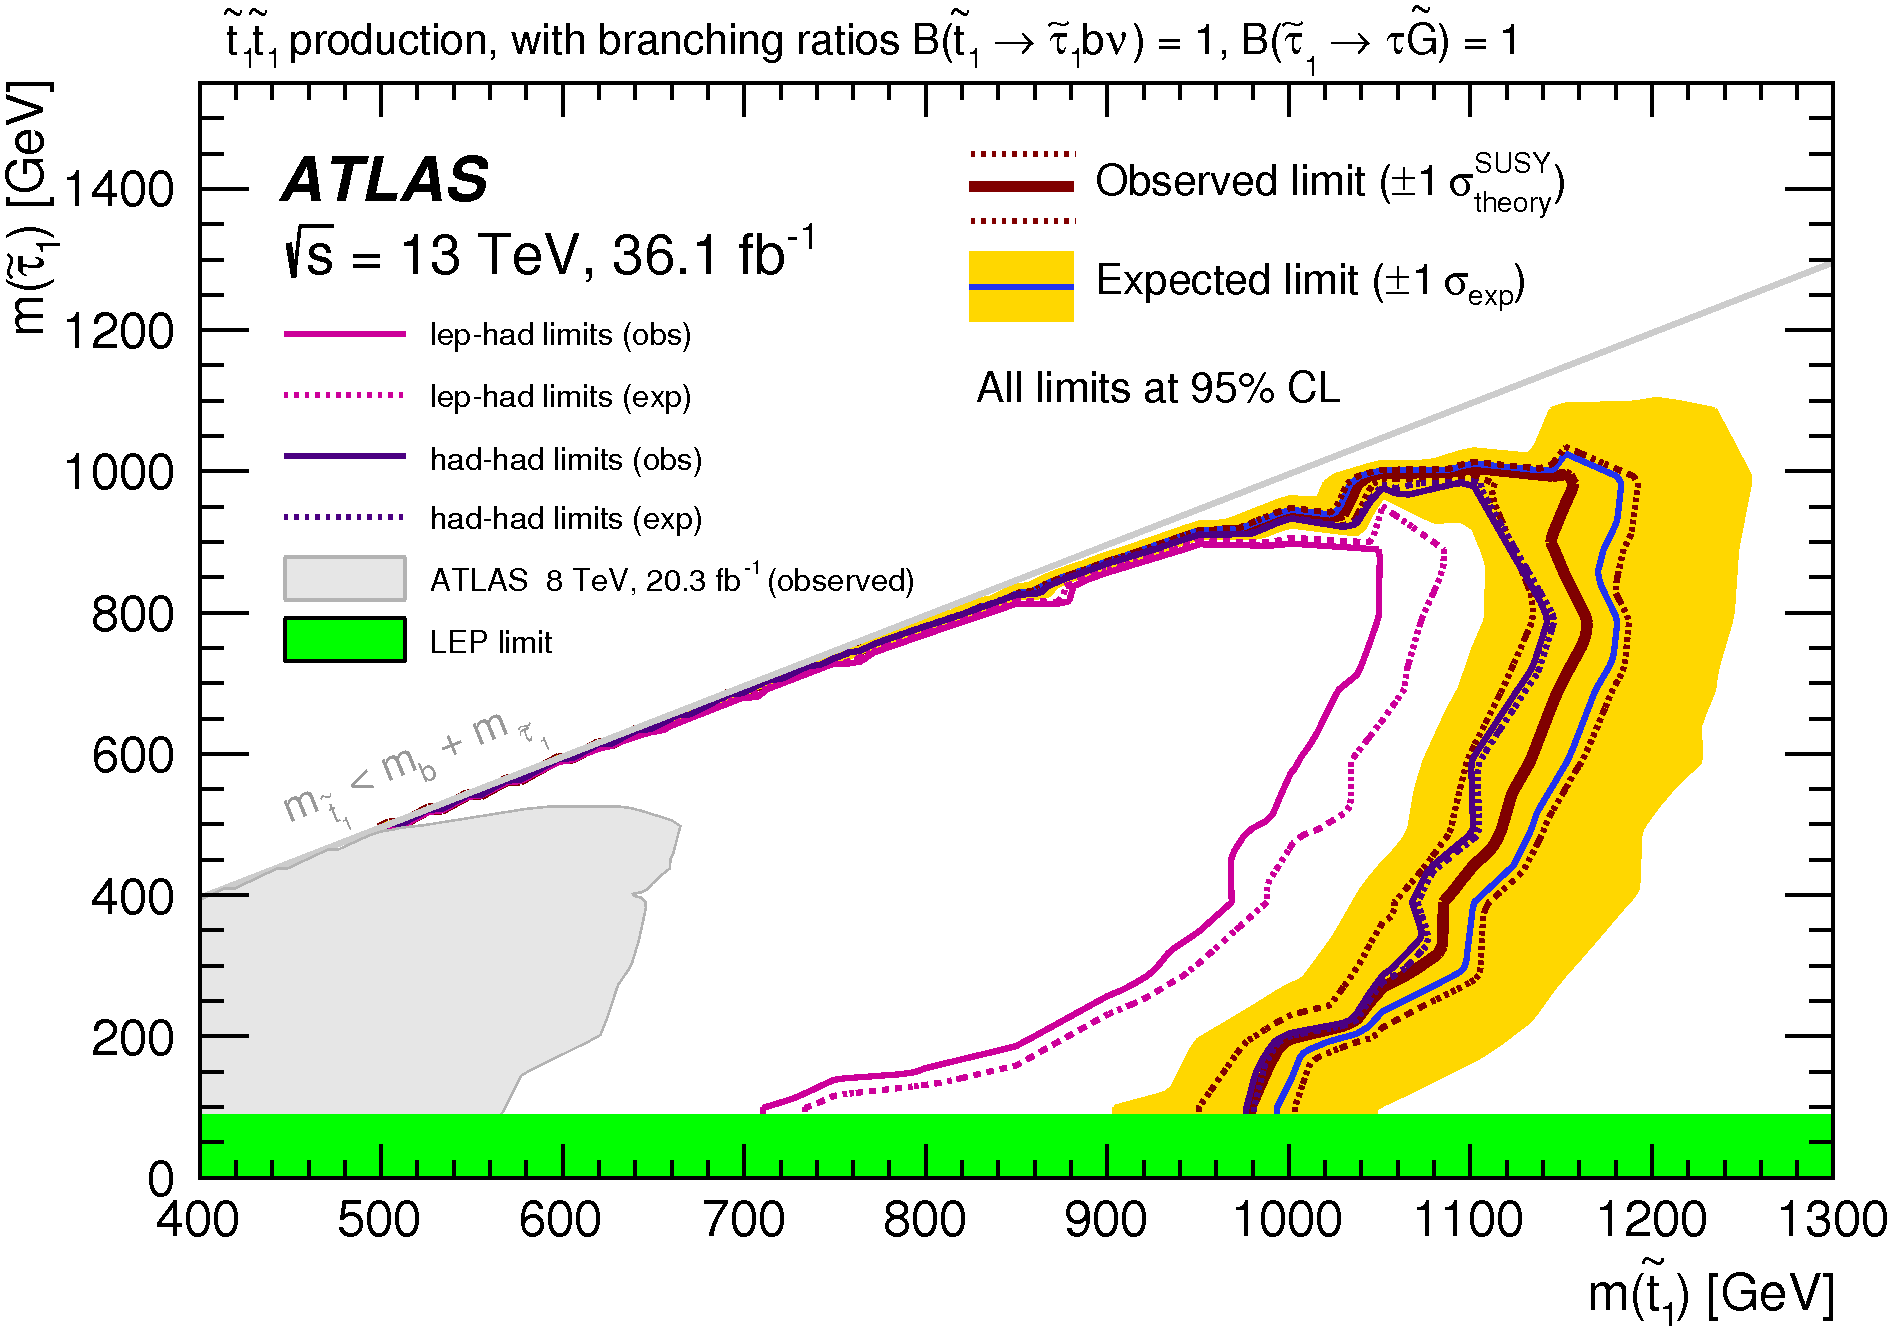 Exclusion plot from the stop-stau search with 2015+2016 data